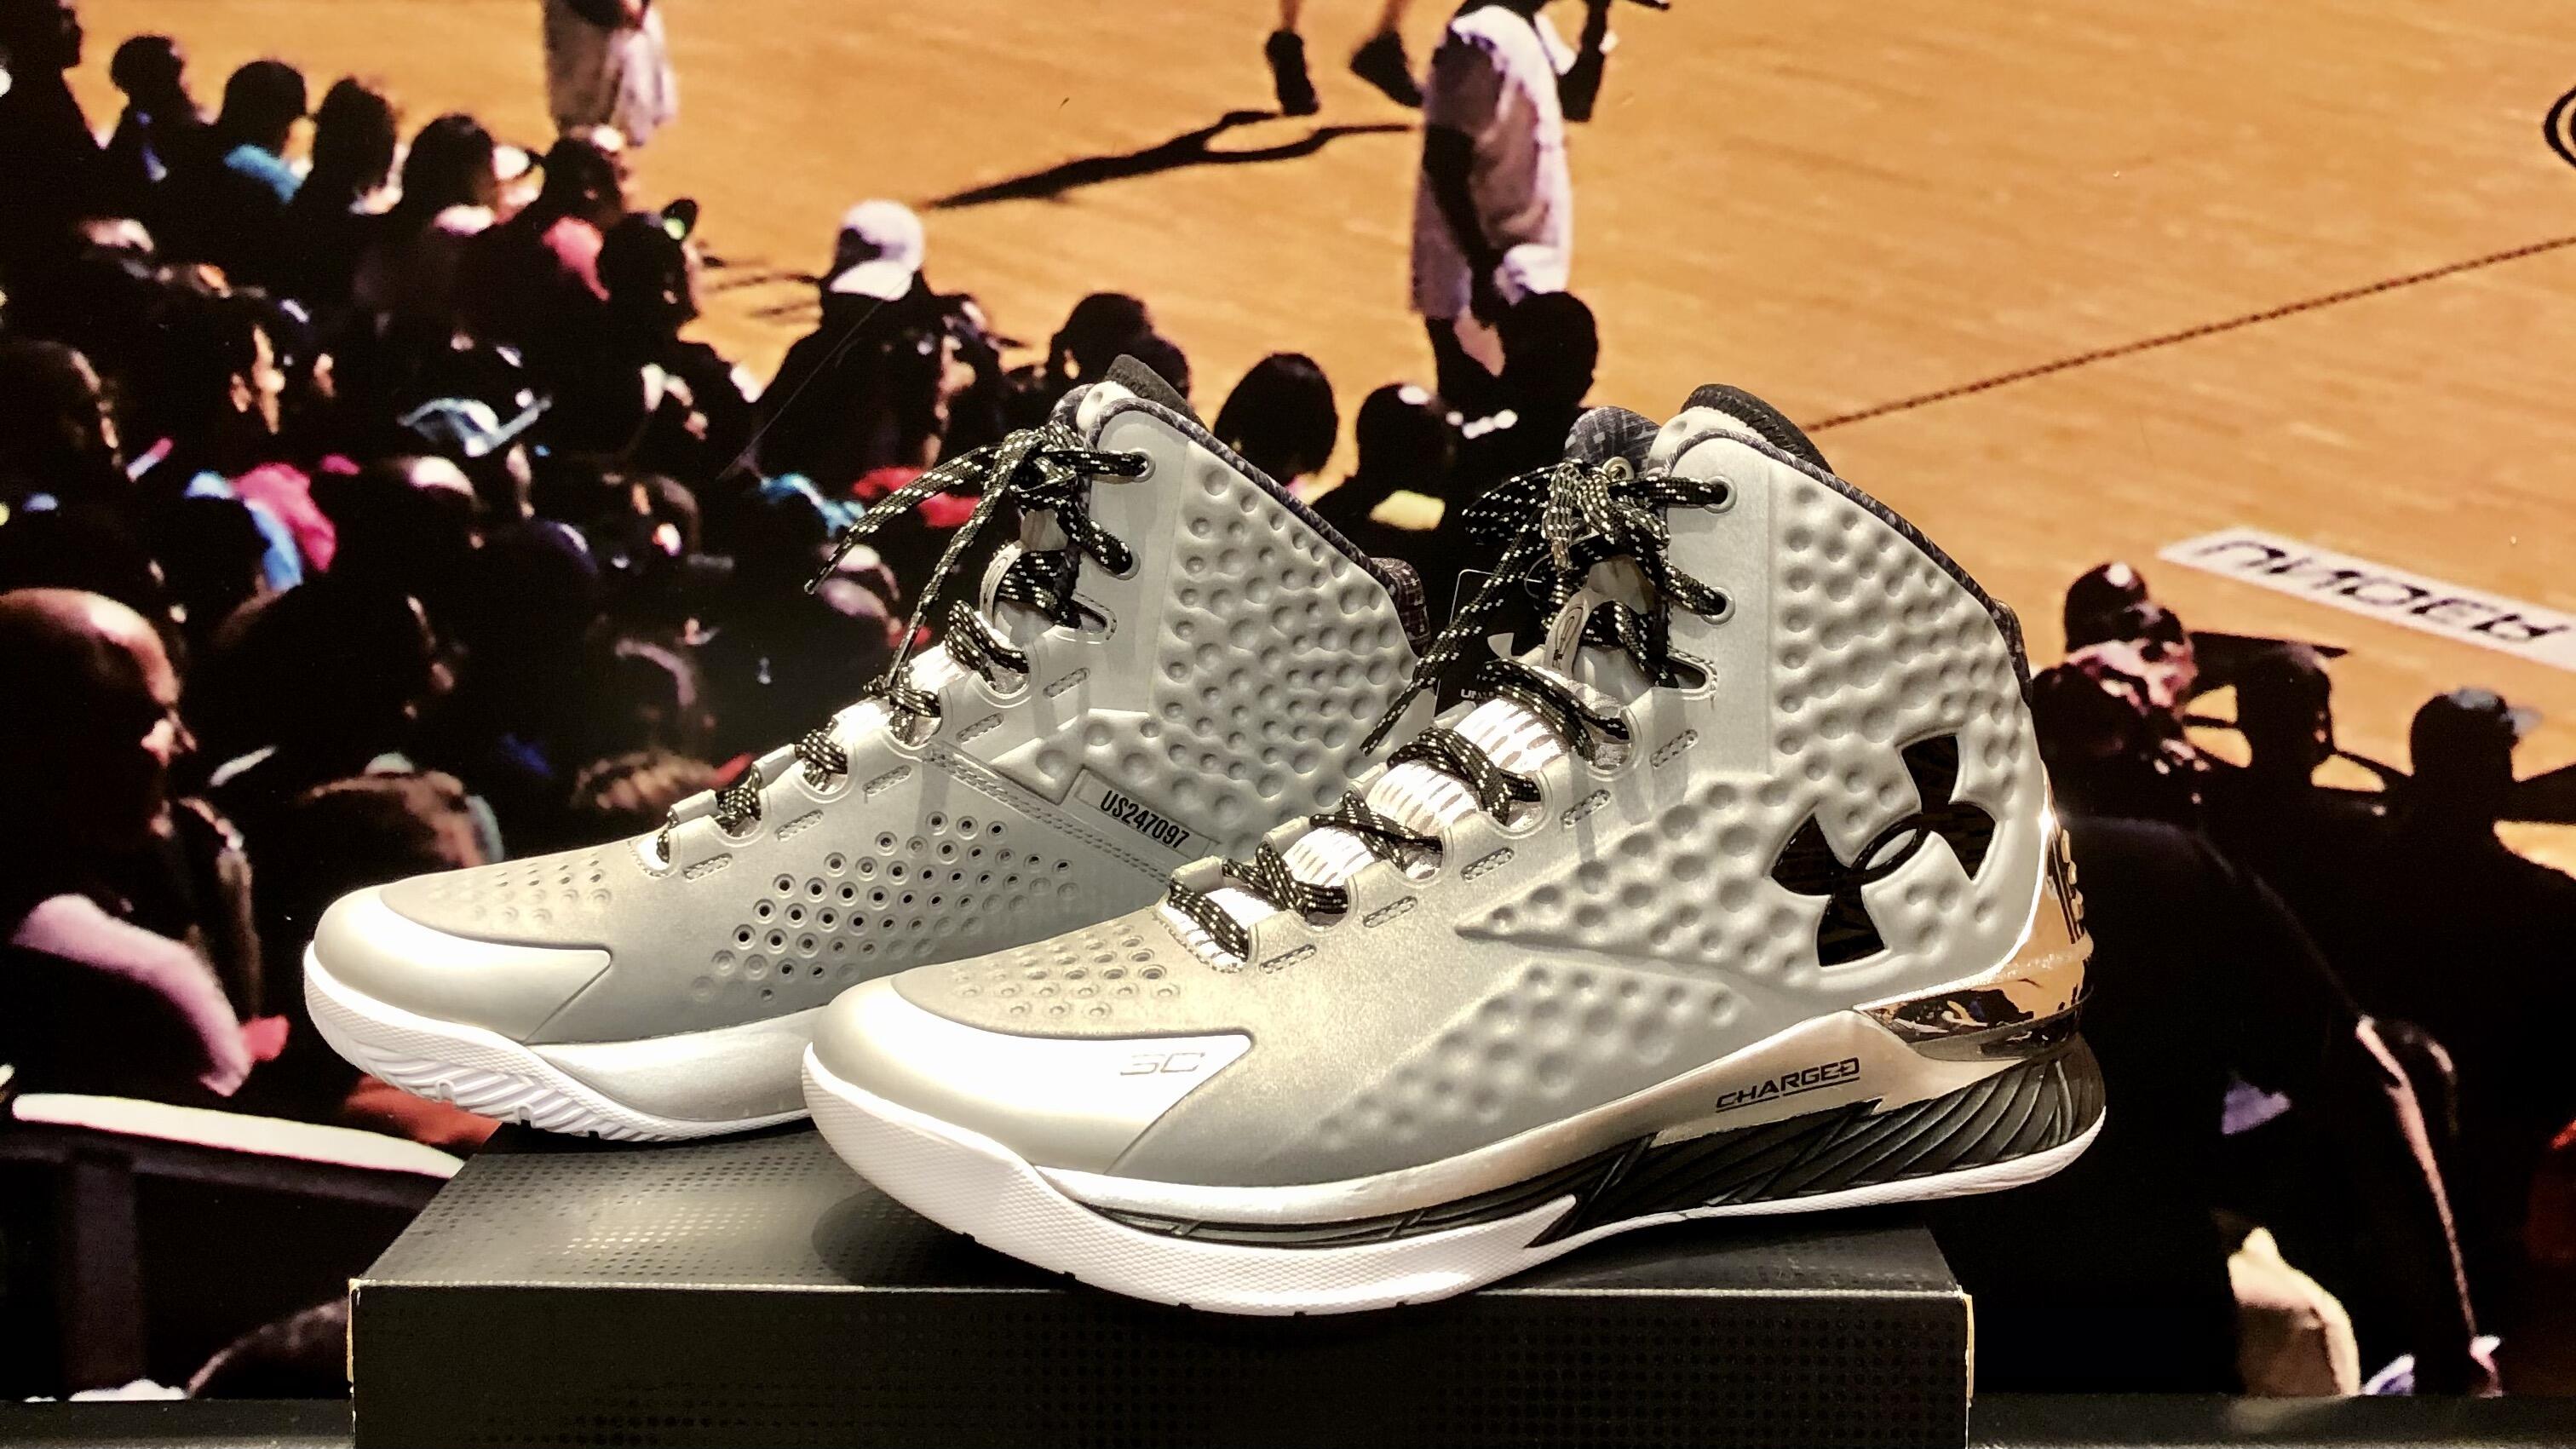 CURRY1 REFLECT | UNDER ARMOUR BRAND HOUSE 心斎橋 | SHOP BLOG